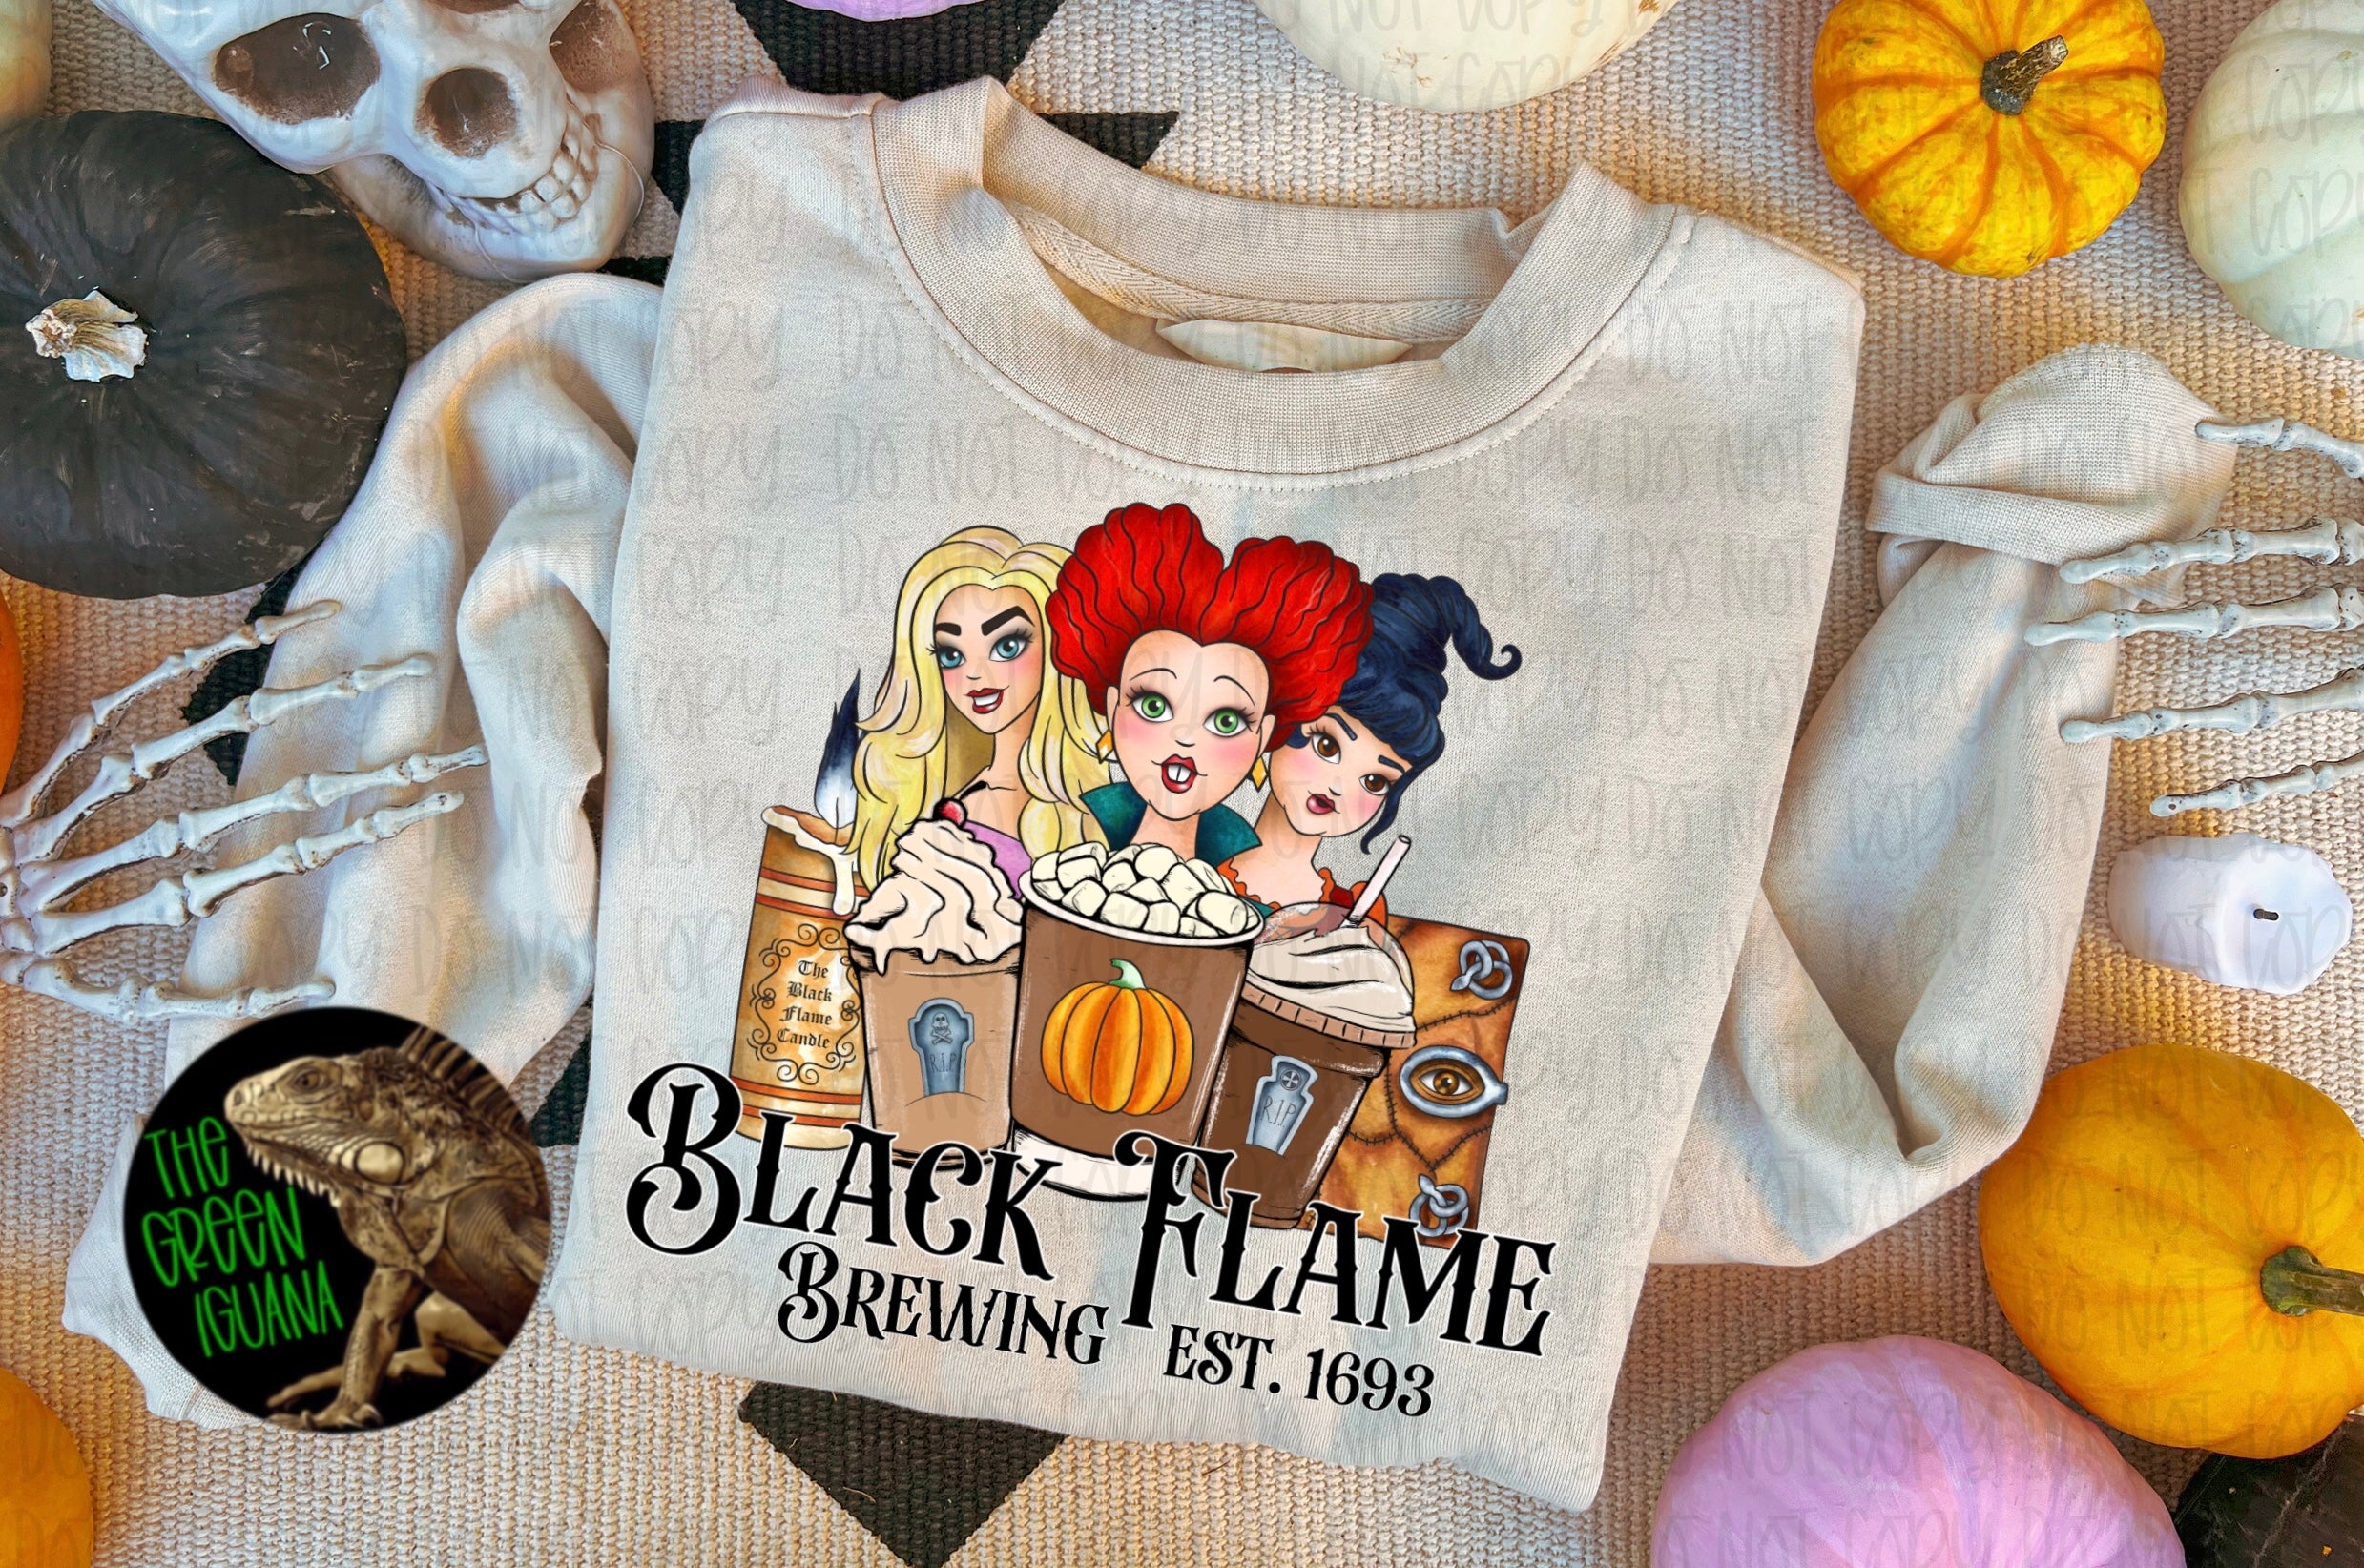 Black Flame Brewing EST. 1693 (with extras) - DIGITAL